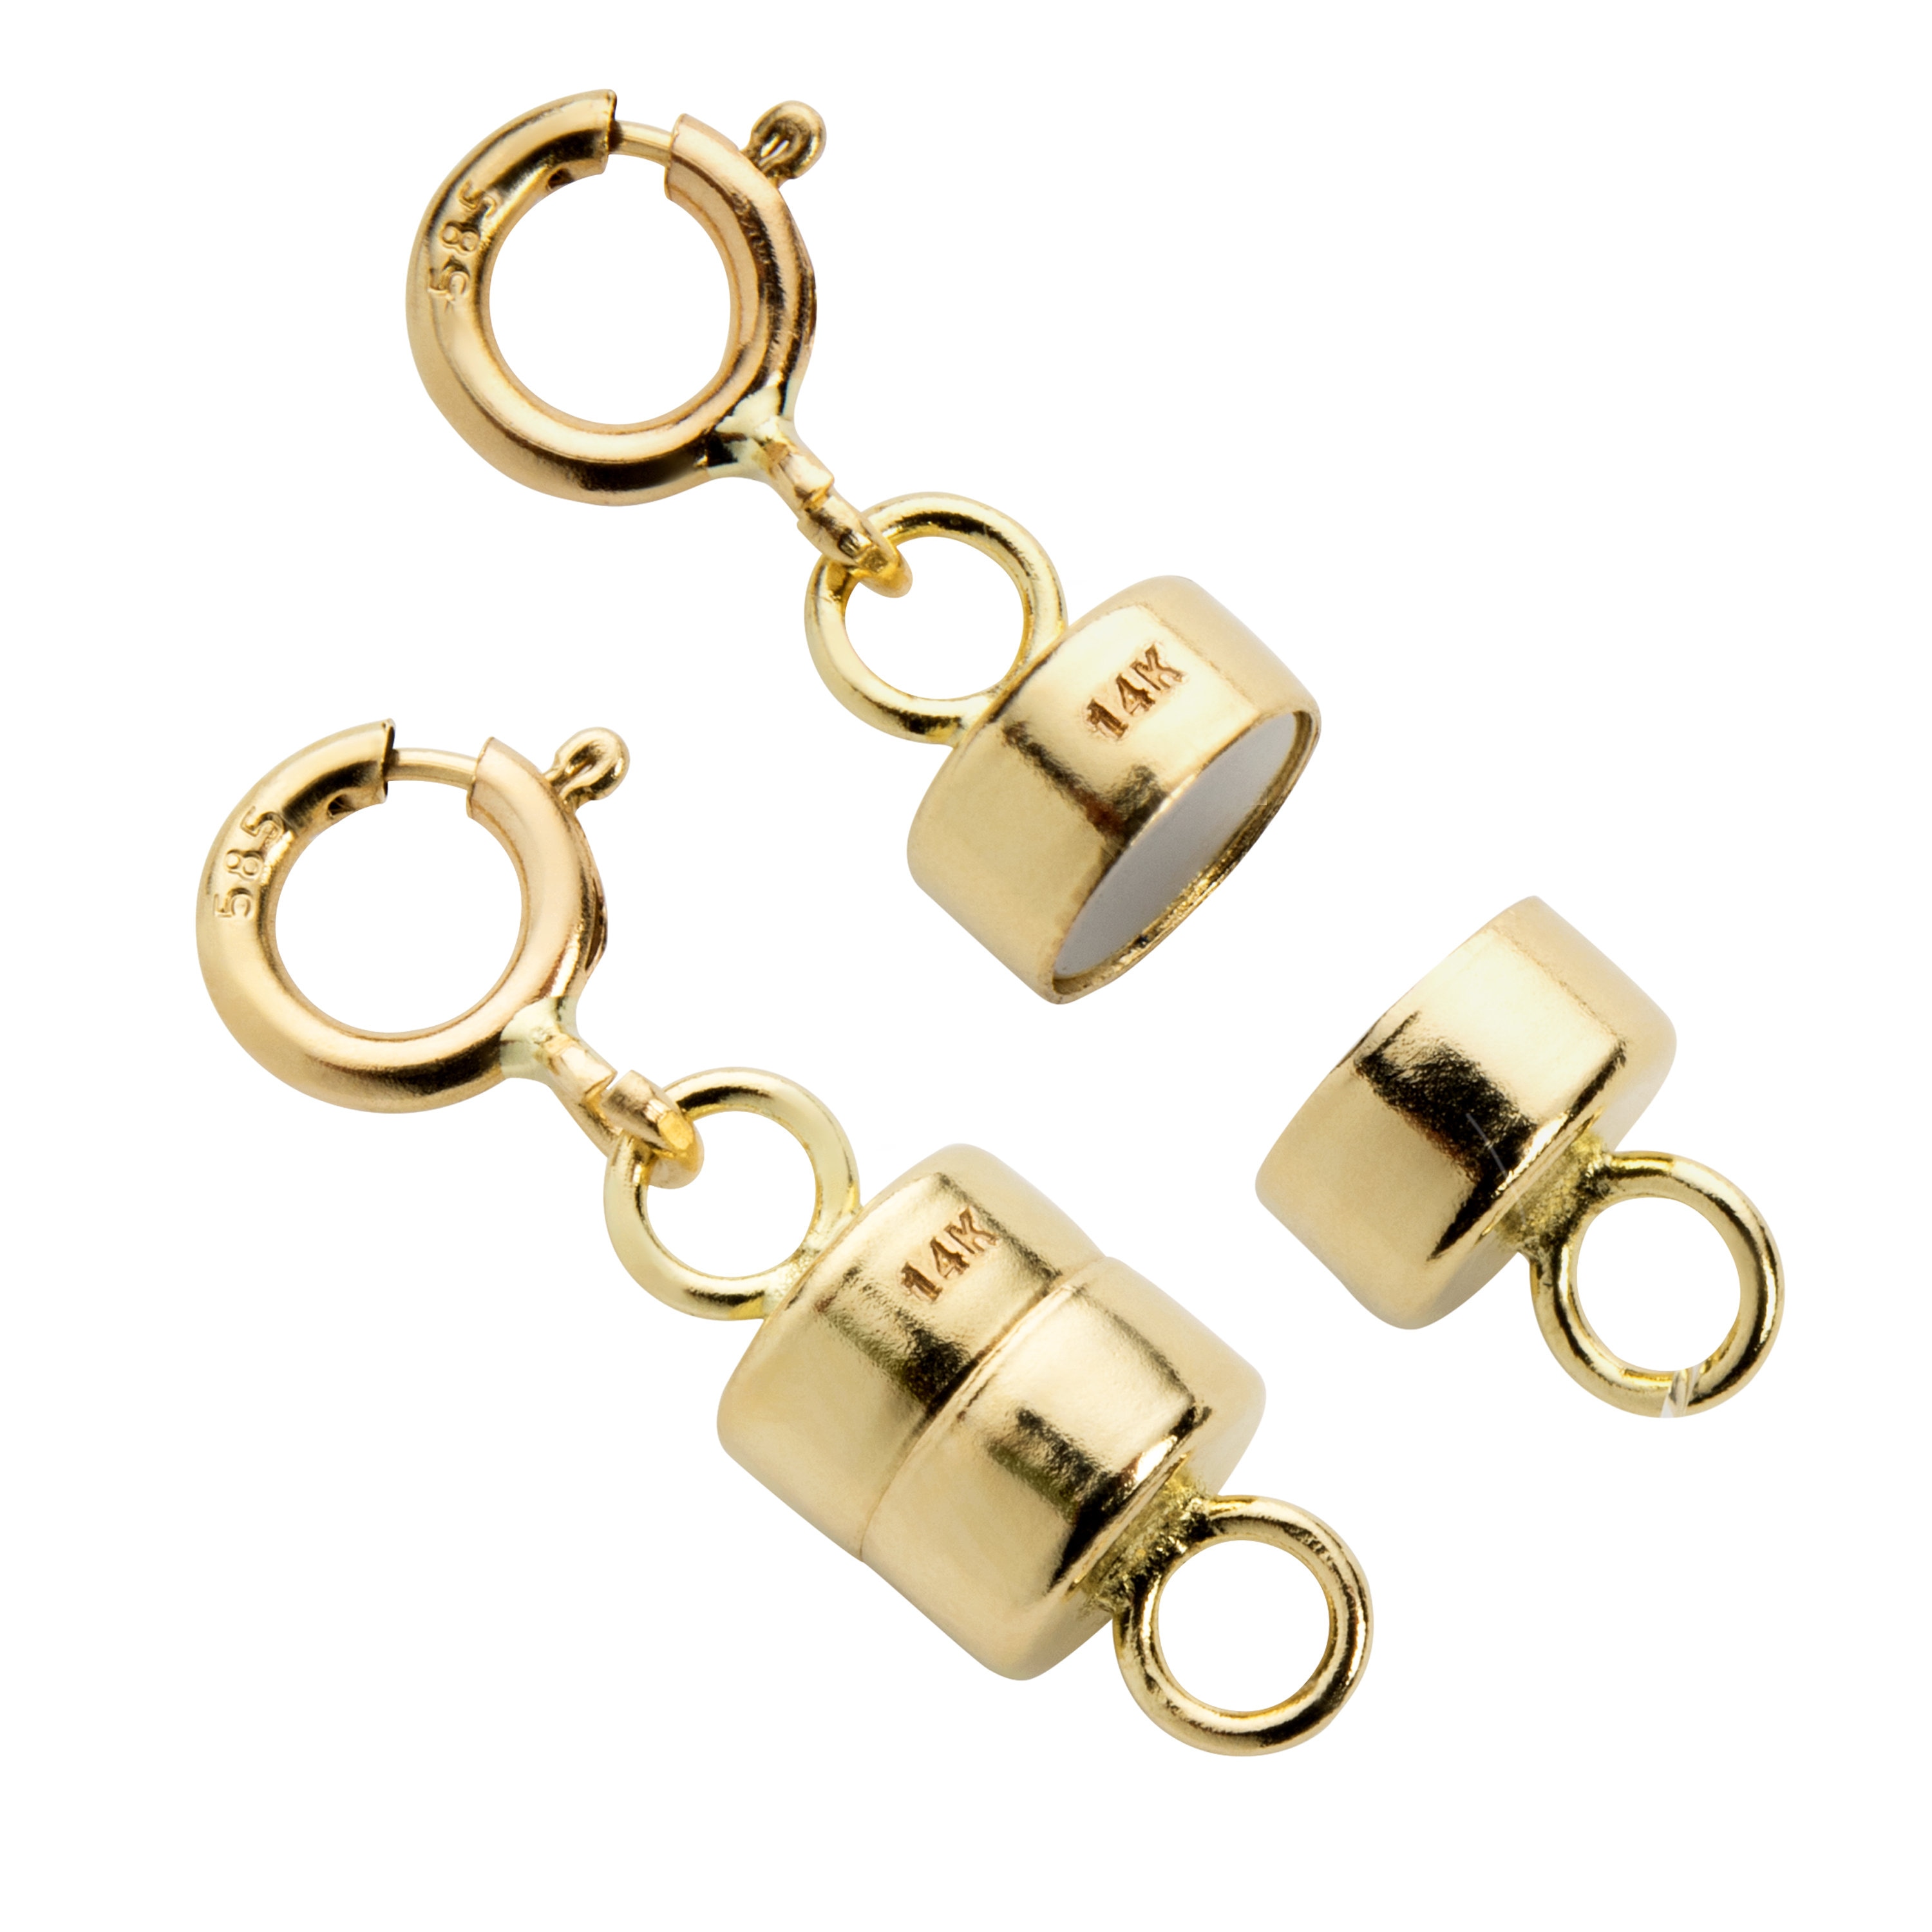 MAGNETIC NECKLACE CLASPS And Closures - Chain Extender Jewelry Clasp  Converter £4.39 - PicClick UK